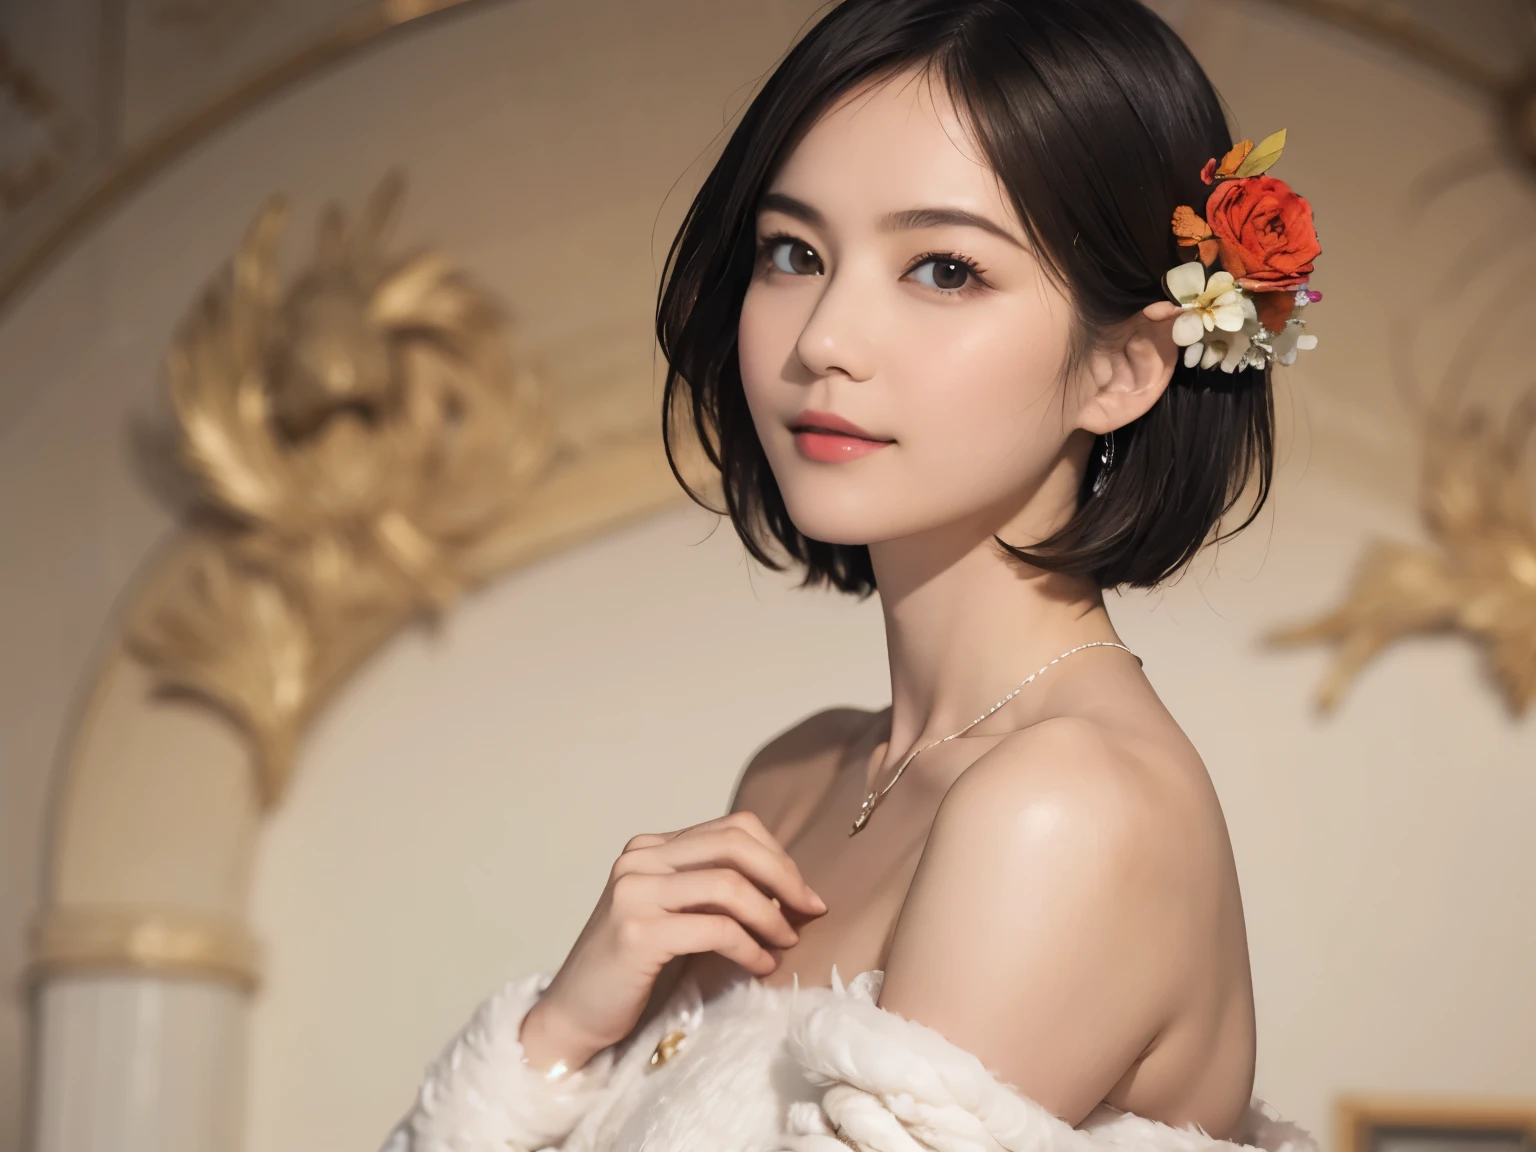 148
(20 year old woman,Floral costume), (surreal), (High resolution), ((beautiful hairstyle 46)), ((short hair:1.46)), (gentle smile), (breasted:1.1), (lipstick)
